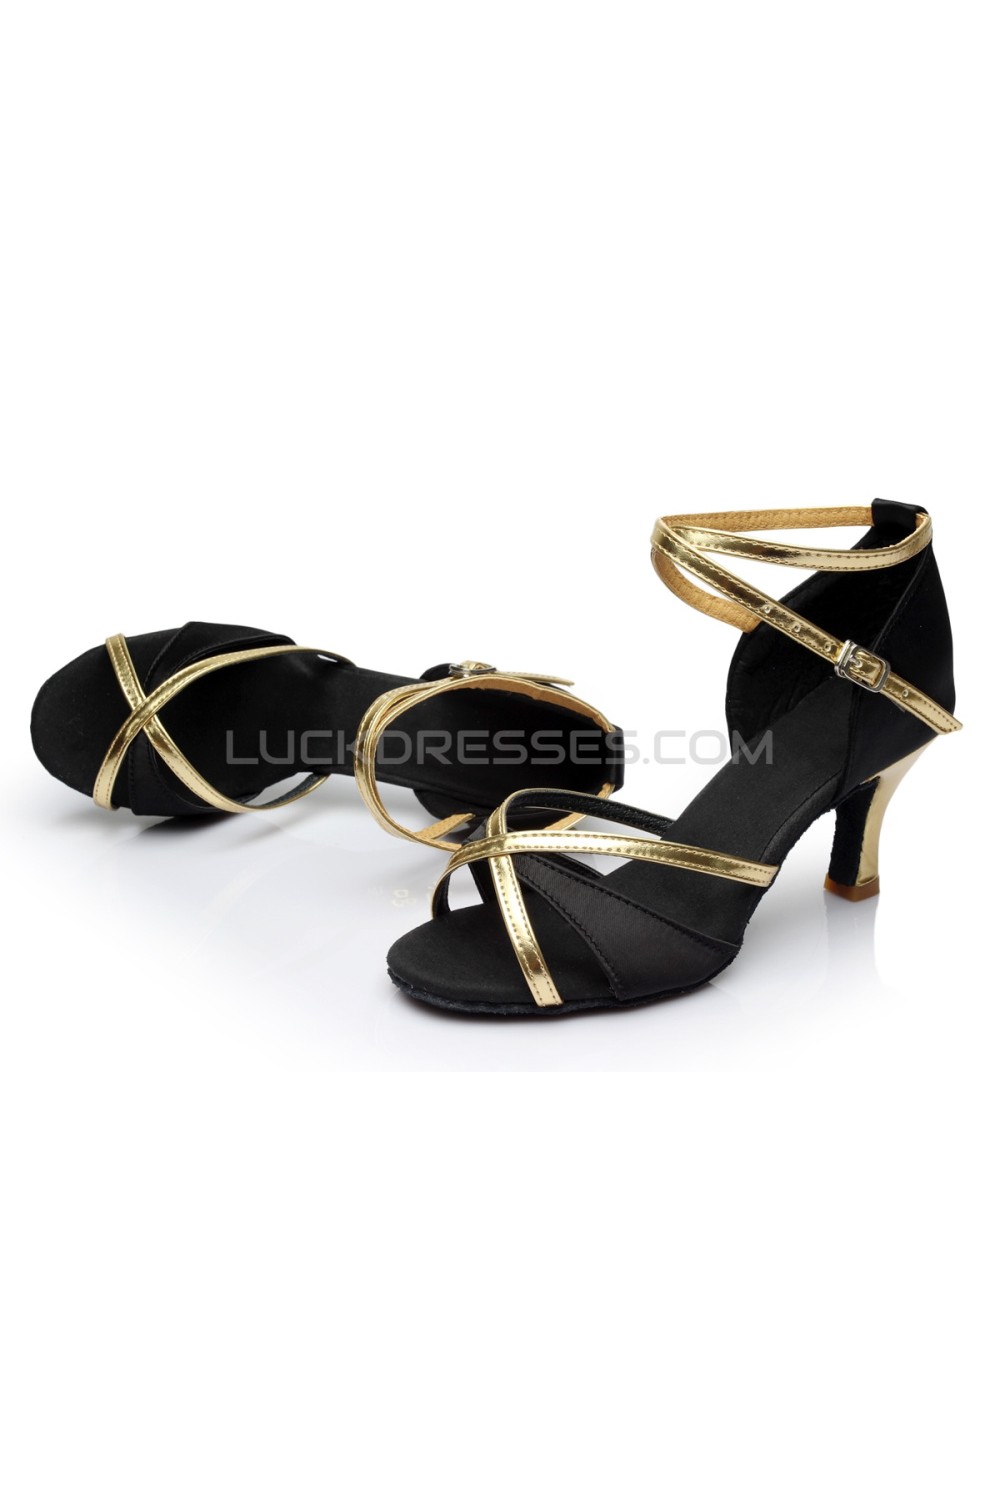 Women's Black Gold Satin Heels Sandals Salsa With Ankle Strap Shoes D602020